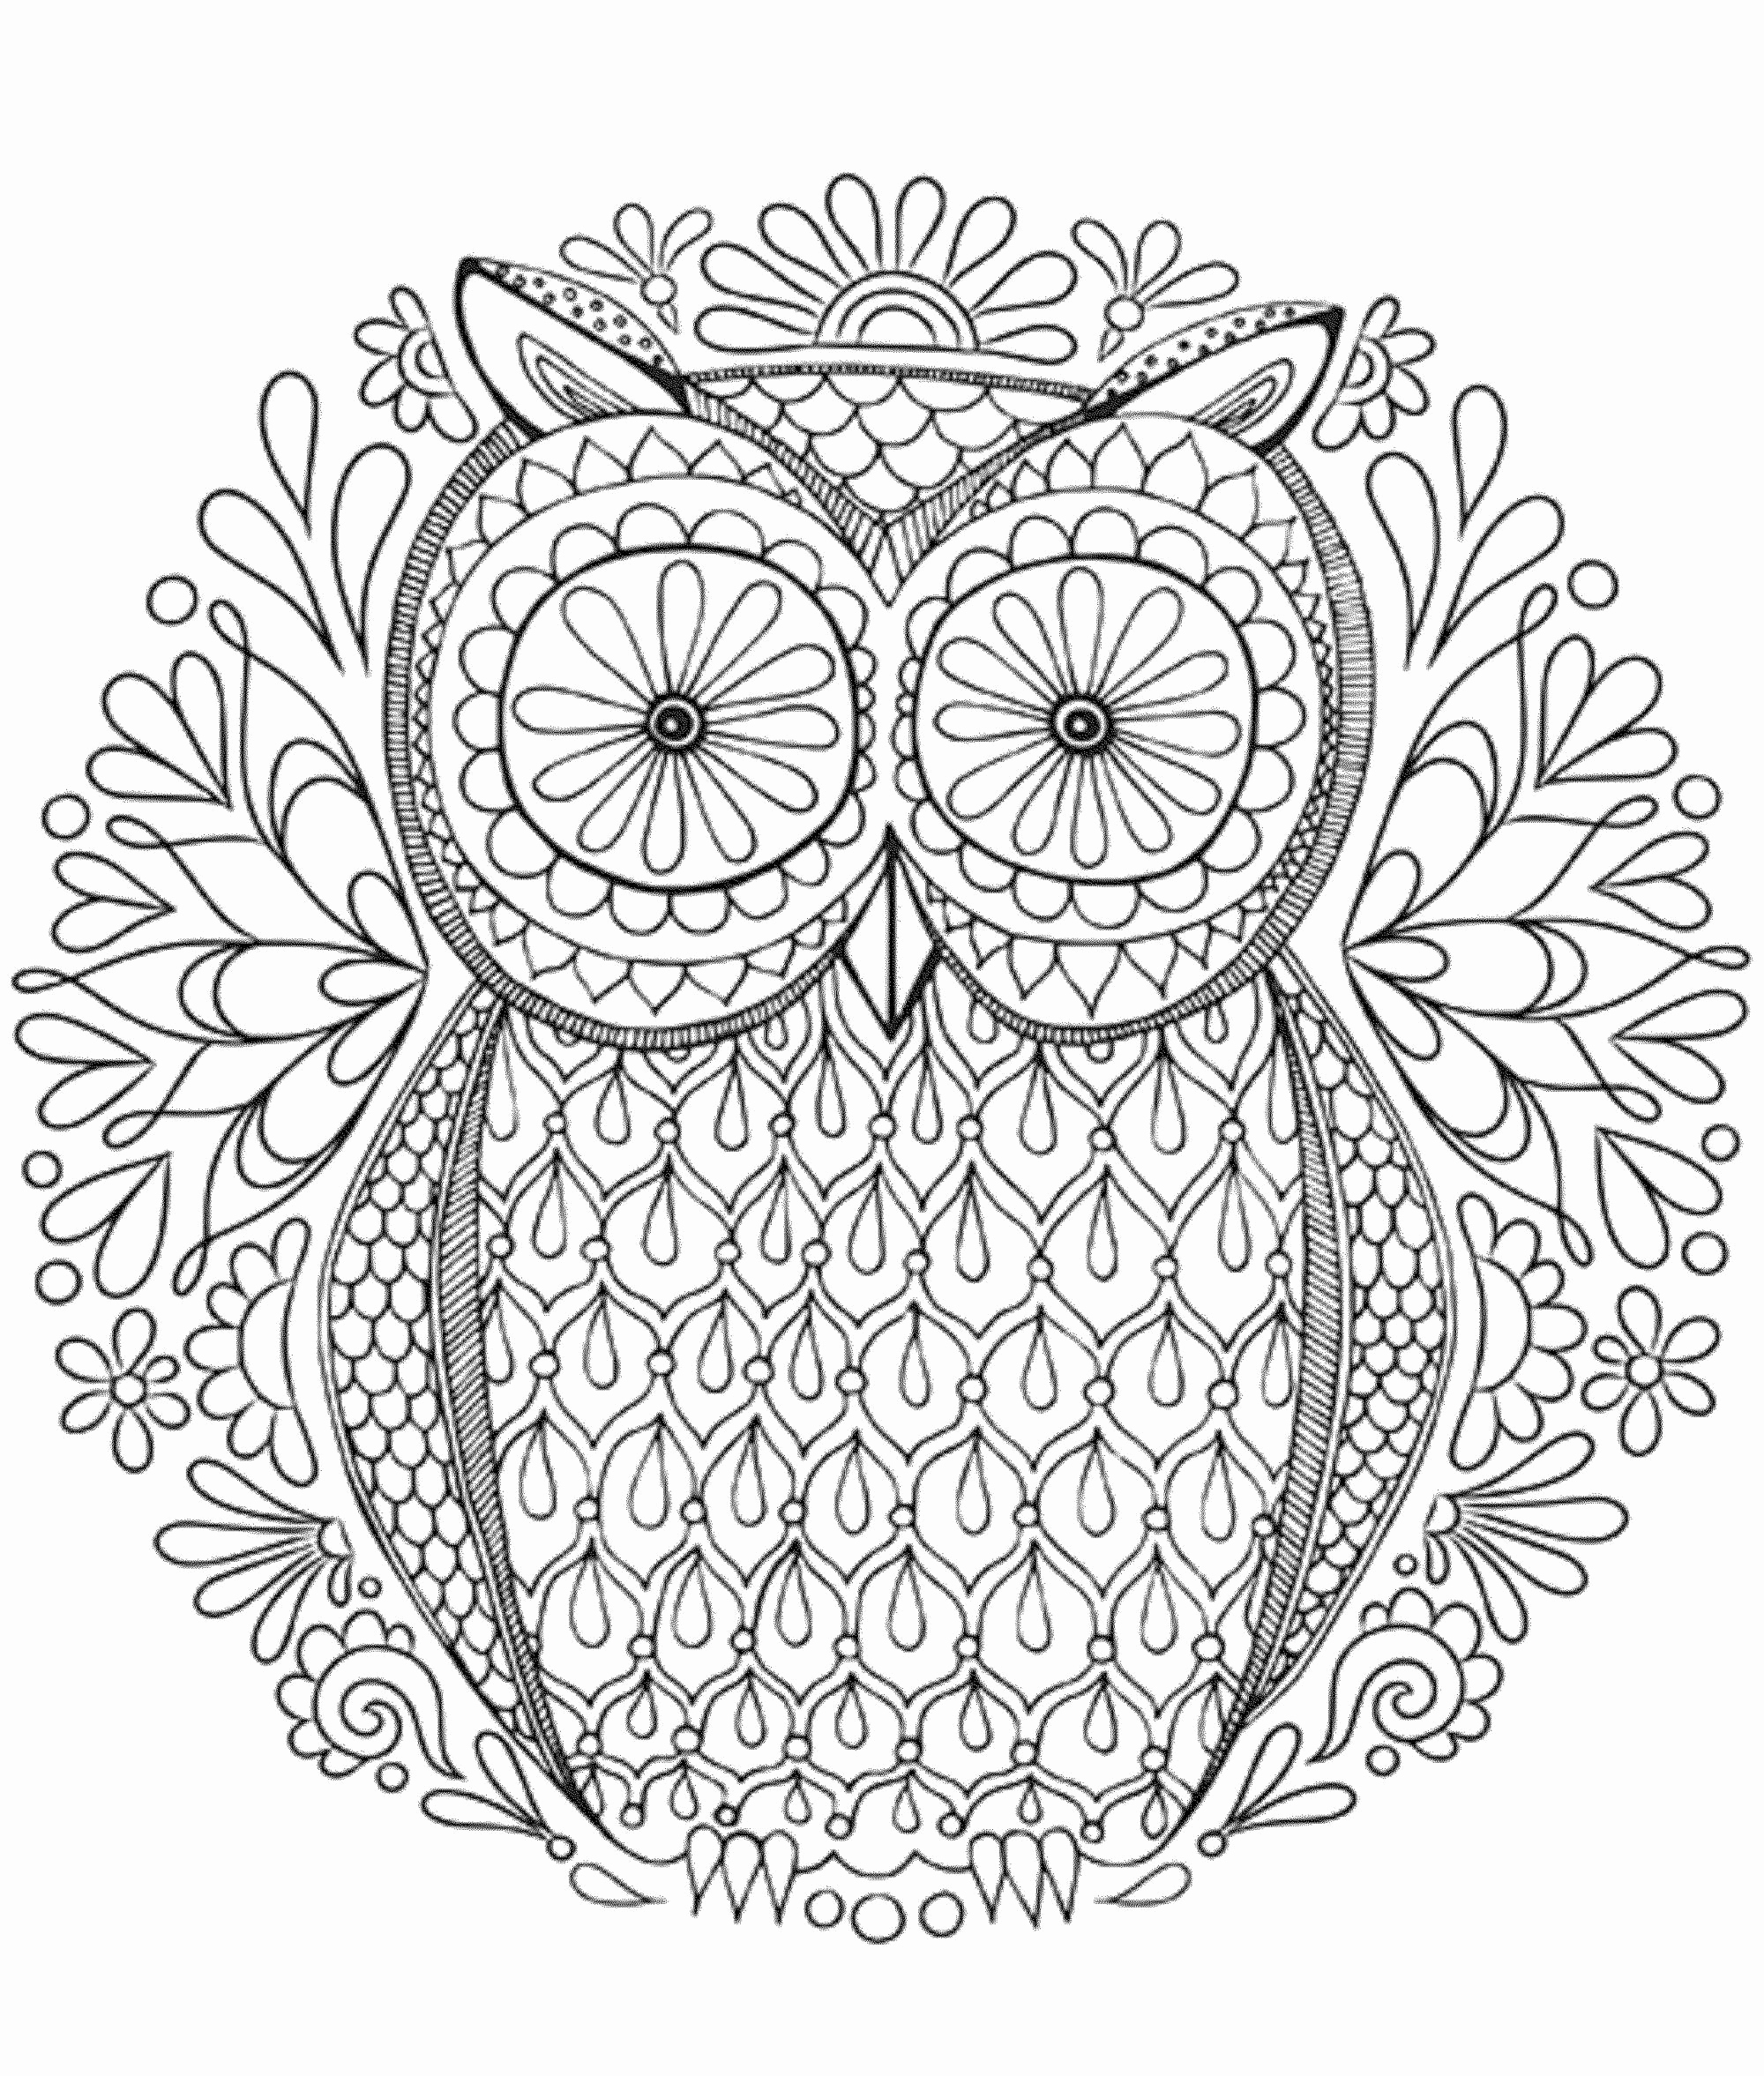 Cute Design Coloring Pages at GetColorings.com | Free printable